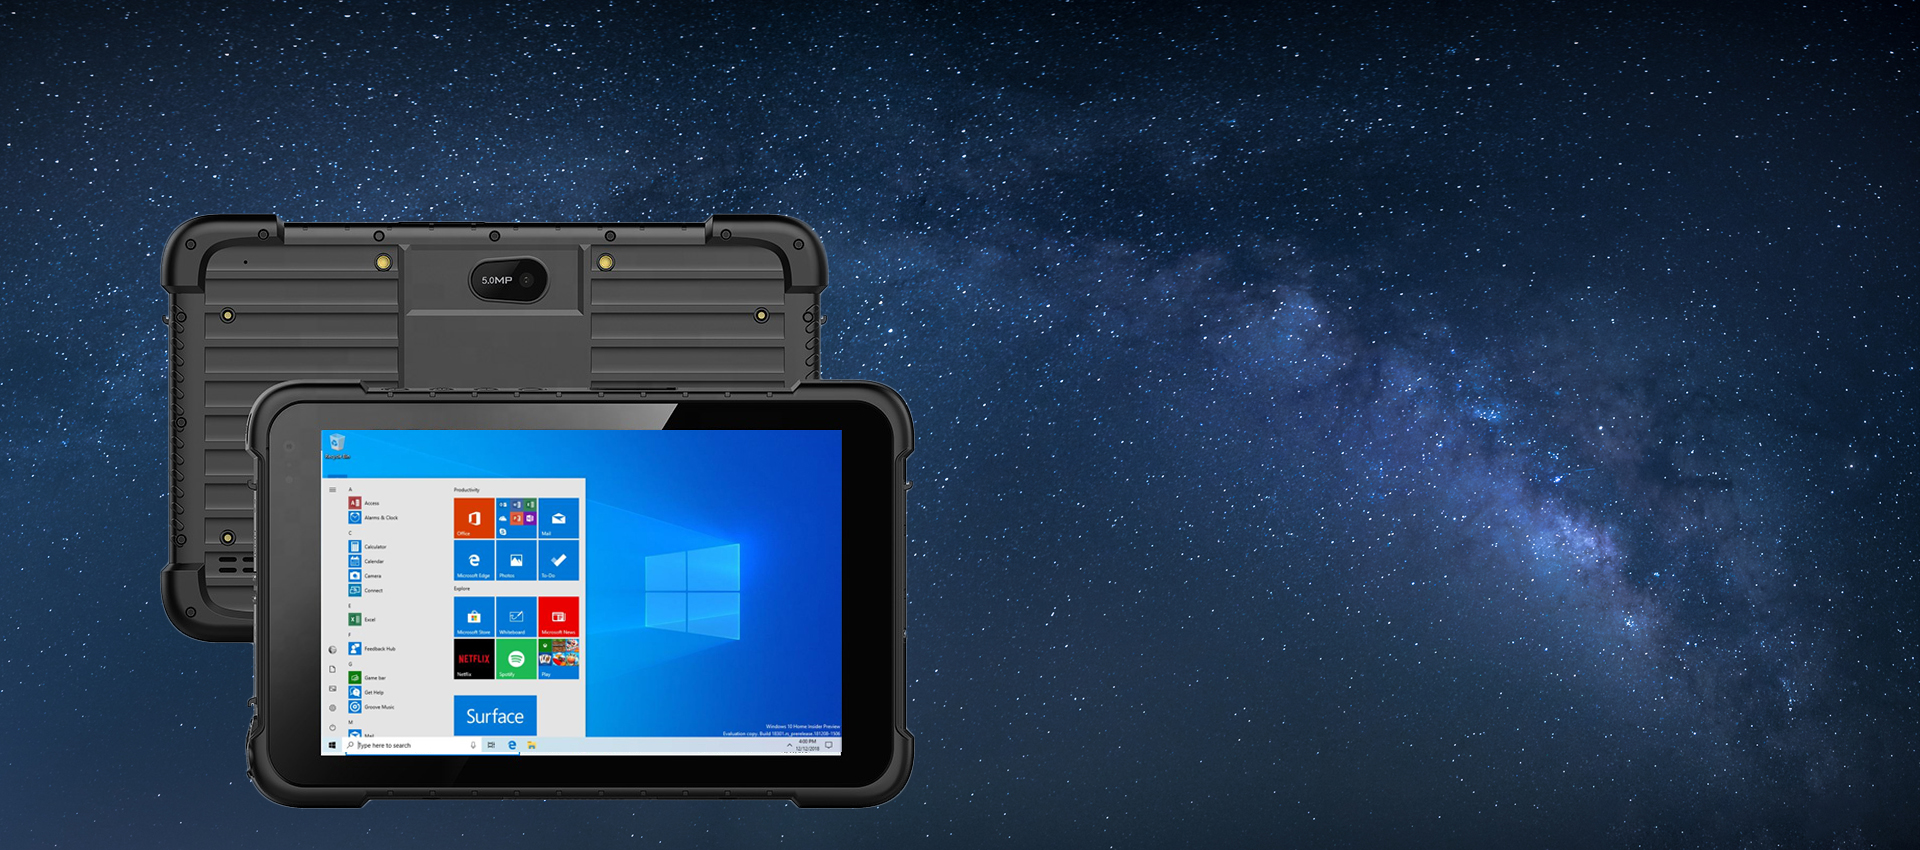 • Support for Windows 10 system
• Optional 3G/4G all network communication, WiFi, Bluetooth and other communication modes
• 8500mAh battery, 8 hours of machine endurance
• IP67 high protection level, in accordance with MIL-STD-810G
• Support GPS, more accurate positioning
• Support 5 million pixel auto focus camera, easy to collect images and video information.
• Support 1D/2D, NFC and other functional modules for free selection